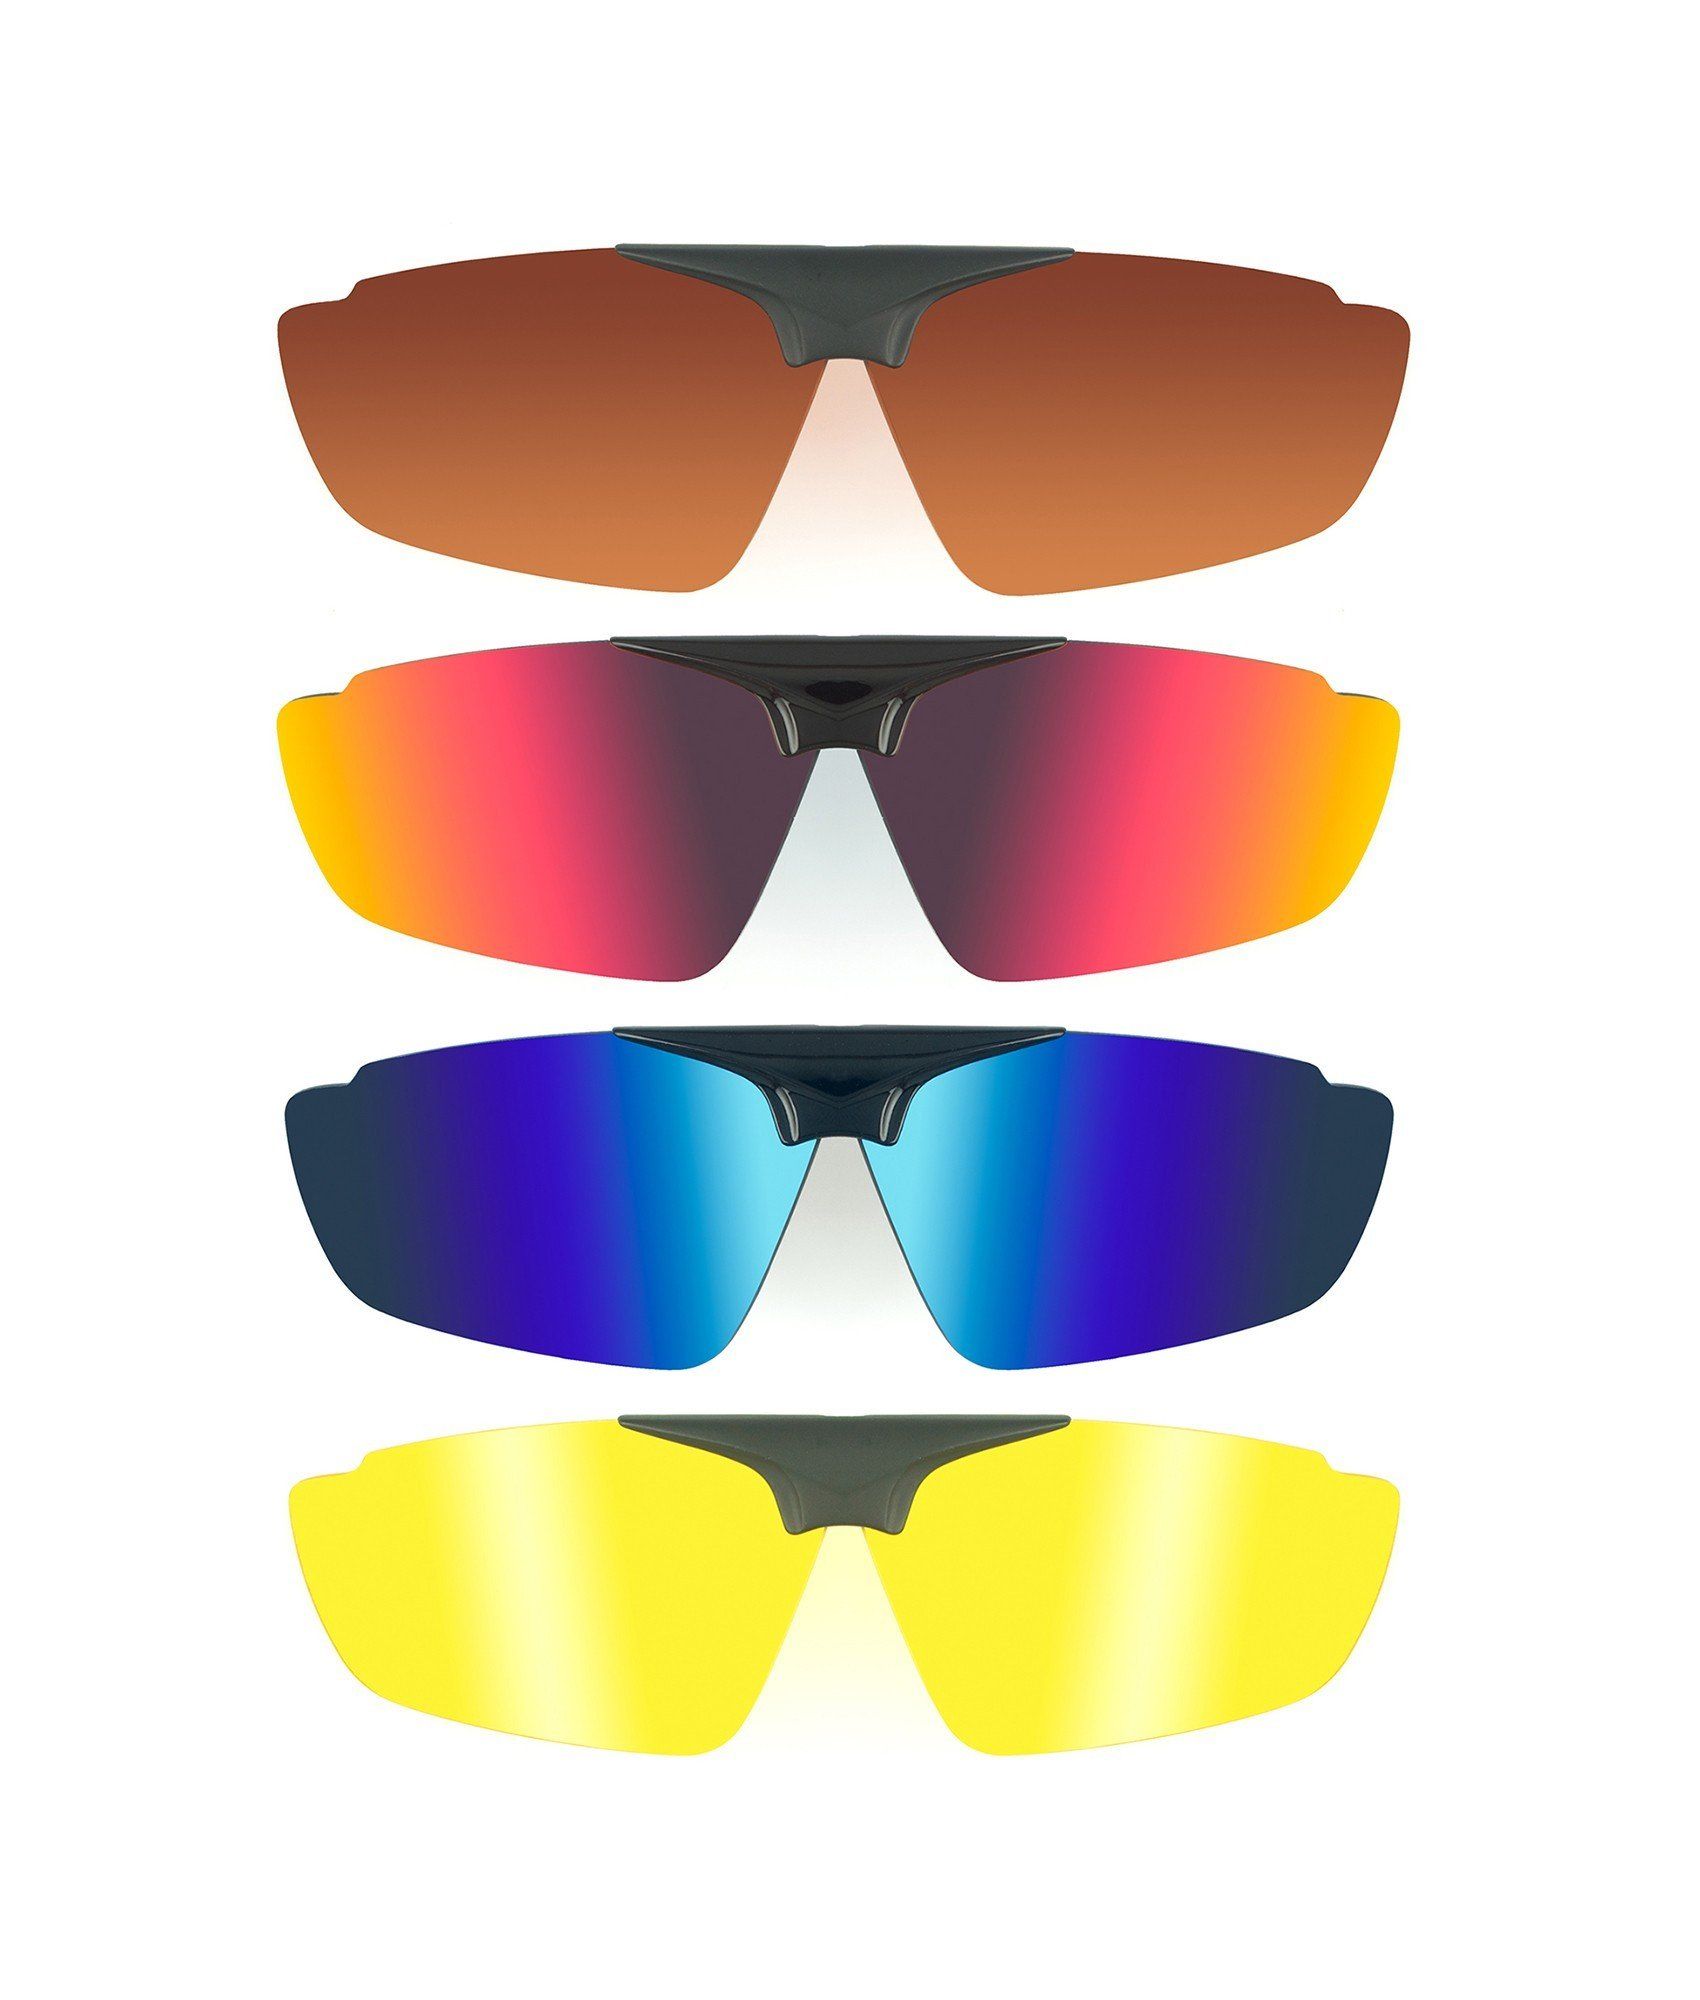 Sunglass Lenses — Replacement Lenses in Peabody, MA